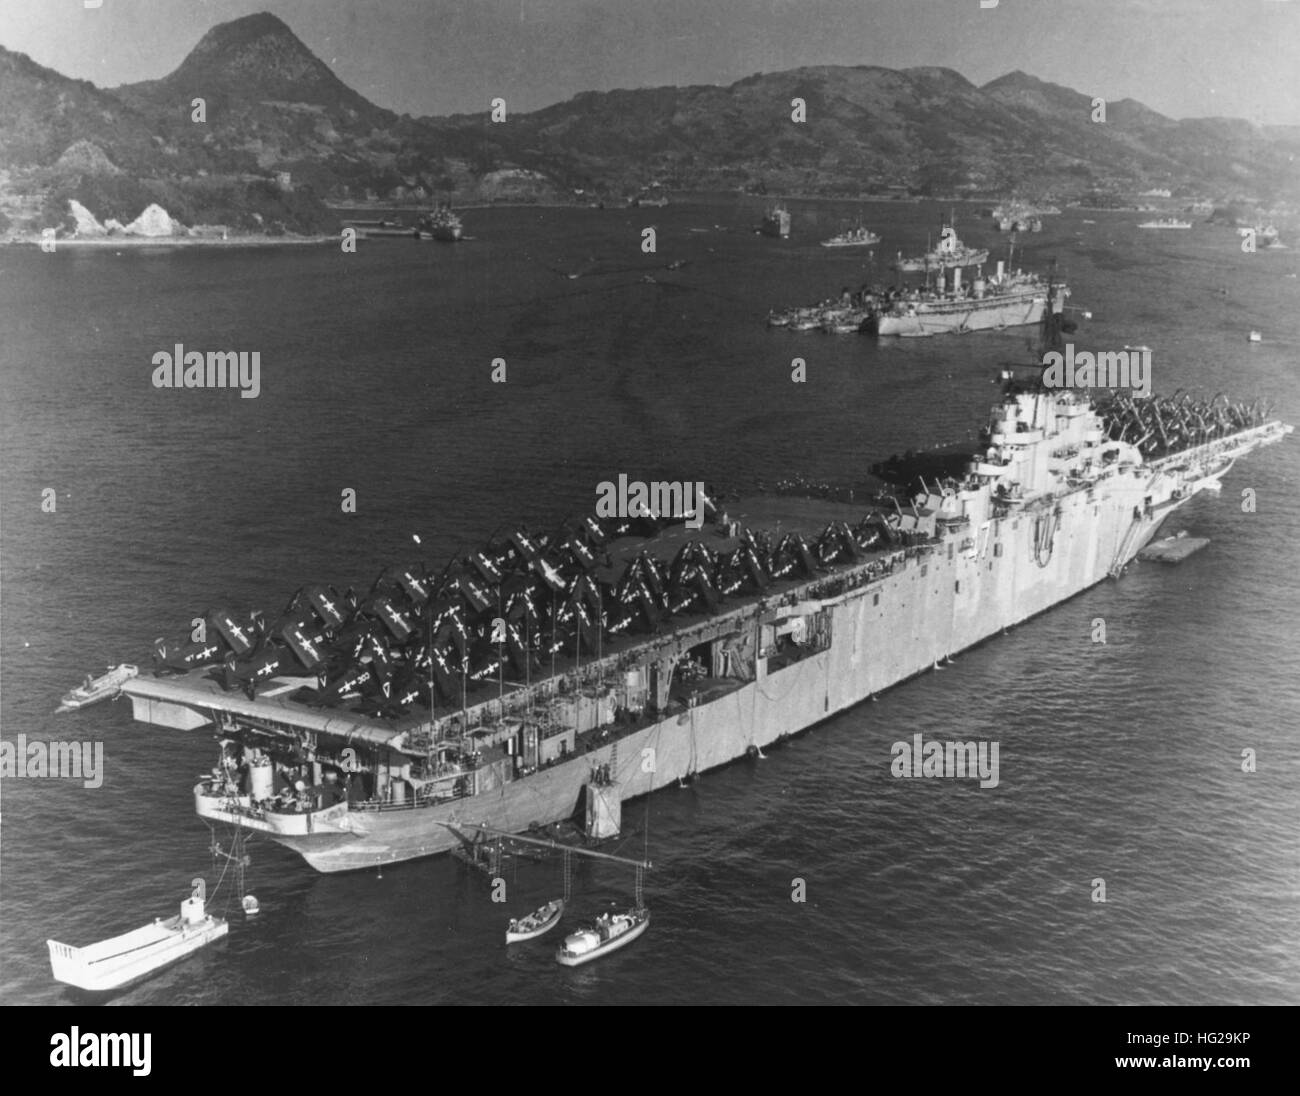 USS Philippine Sea (CV-47) moored at Sasebo, Japan, 3 January 1951, with much of her air group spotted on the flight deck. Planes seen include Douglas AD-4 Skyraiders of Attack Squadron 115 (VA-115), Vought F4U-4B Corsairs of Fighter Squadrons 113 and 114 (VF-113 & VF-114) and Grumman F9F-2 Panthers of Fighter Squadrons 111 and 112 (VF-111 & VF-112). Note: Destroyer tender and destroyers in the middle distance, with USS Juneau (CLAA-119) just beyond; LCM-3 landing craft tied to the carrier's stern; and barge and ship's boats alongside her starboard quarter. Official U.S. Navy Photograph, now i Stock Photo